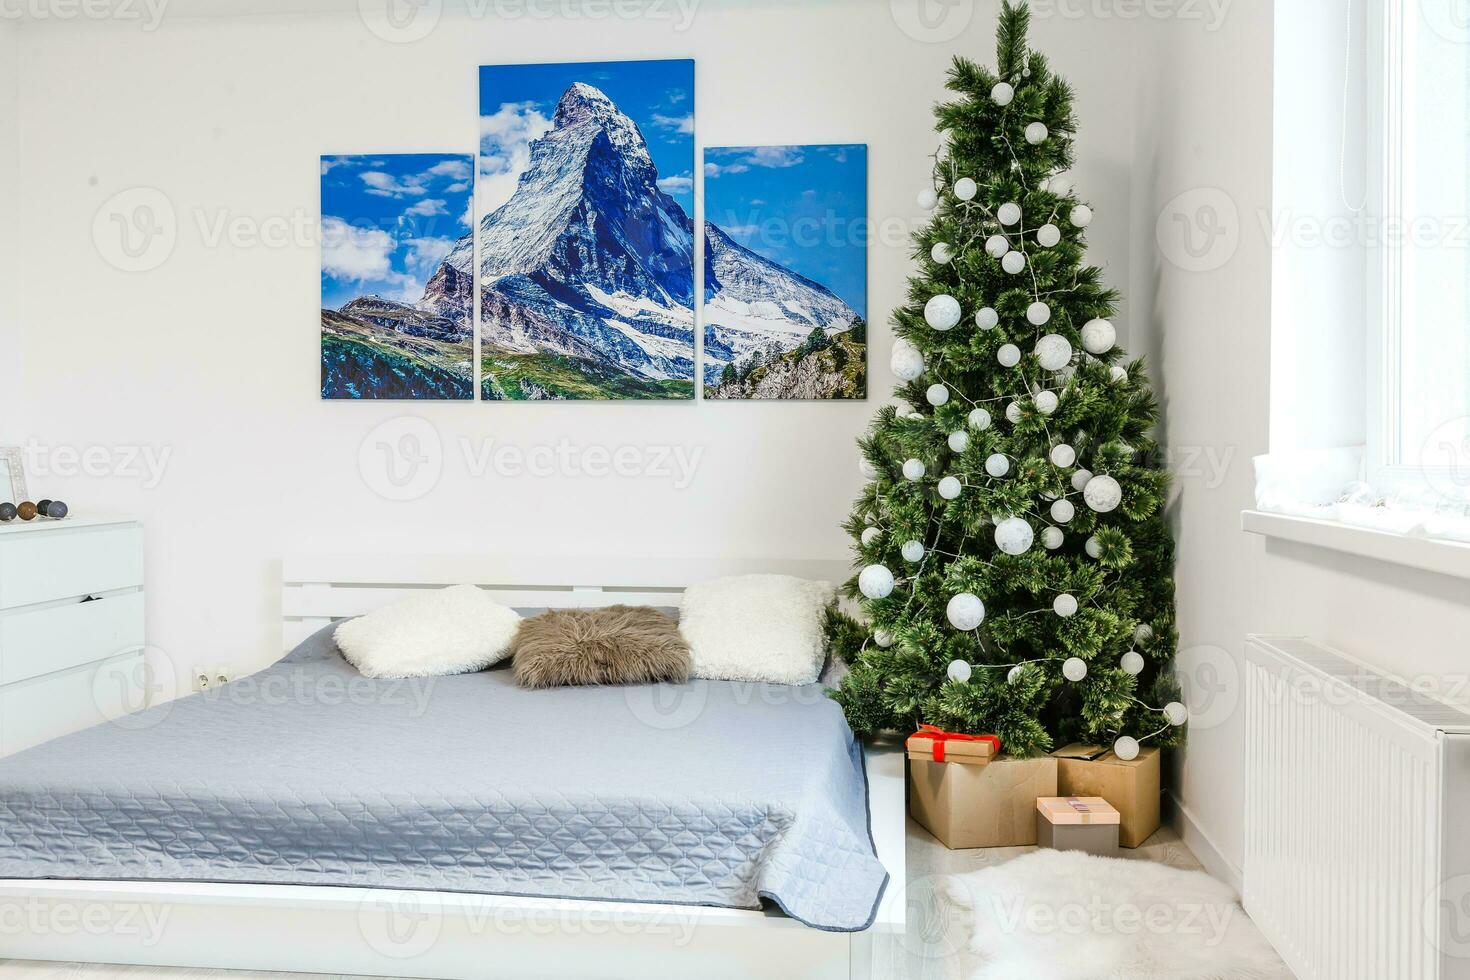 Calm image of interior Classic New Year Tree decorated in a room with bed photo